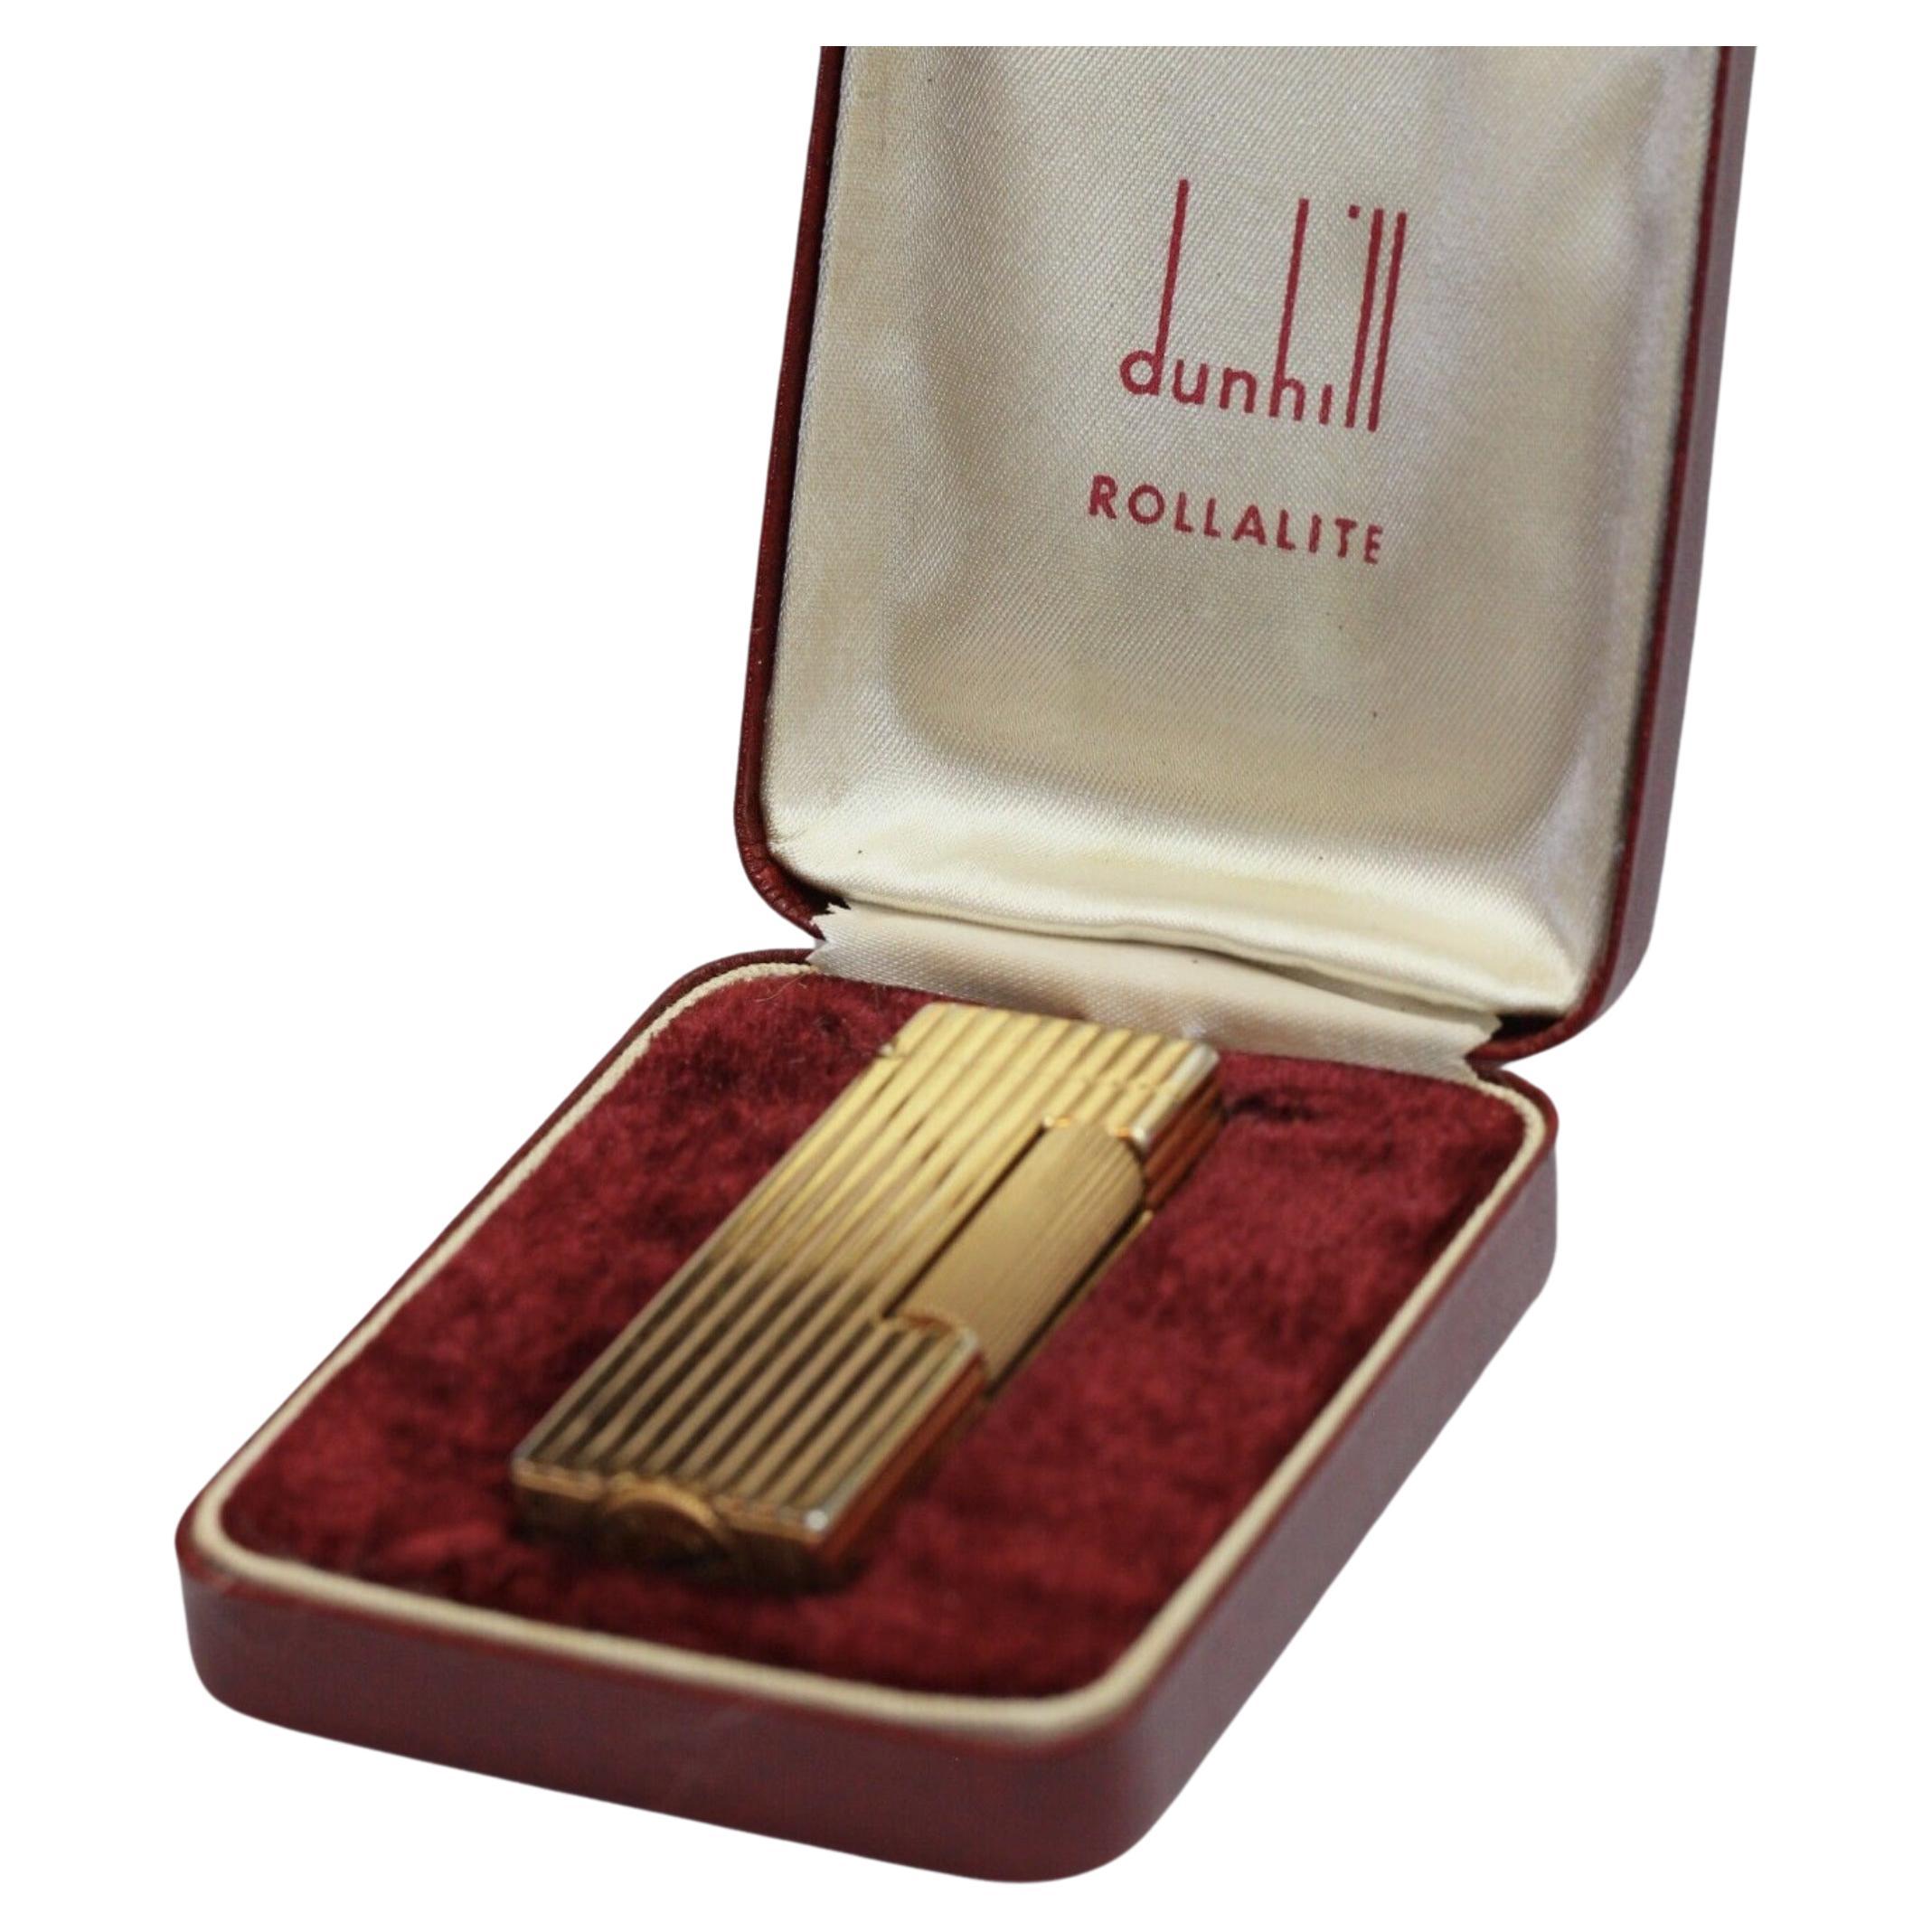 This Rare Original James Bond Vintage 1950s Dunhill ROLLALITE Gold Plated Lighter 
In Mint Working condition 
In the original British Red Sky Case with the Luxury red Velvet interior
The lighter is gold plated and in excellent condition 
There is an